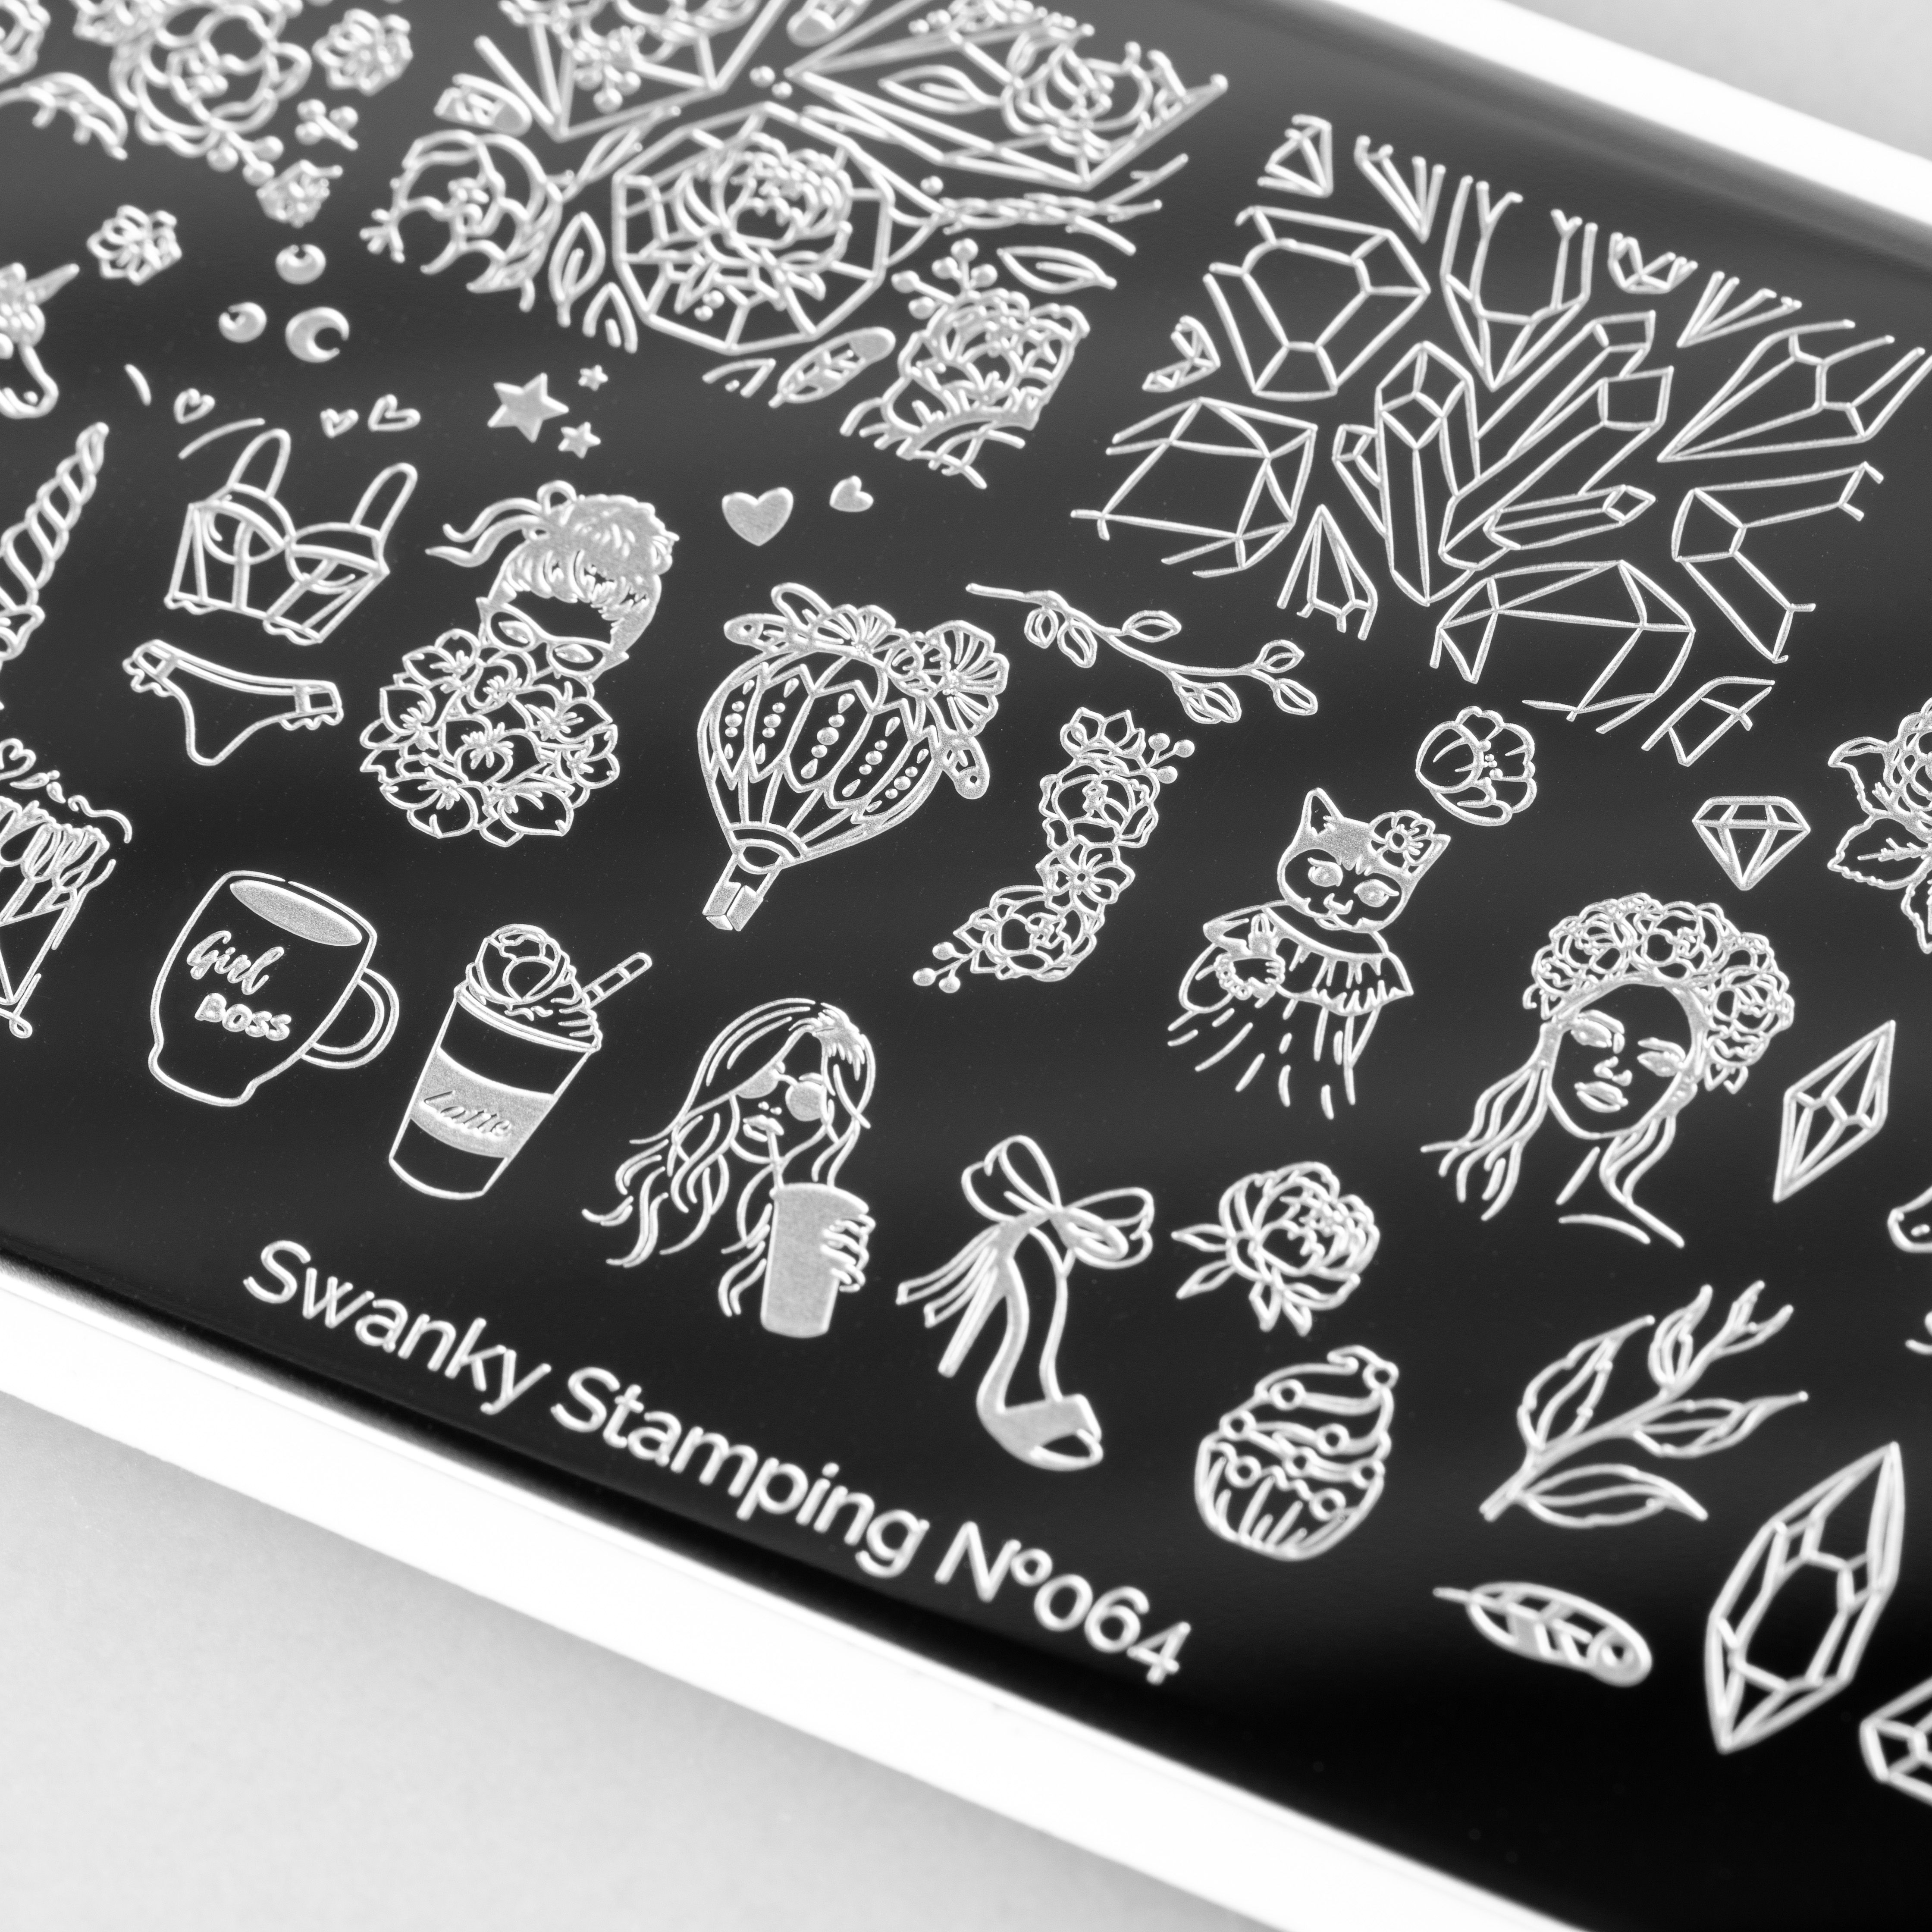 Swanky Stamping, Пластина 064